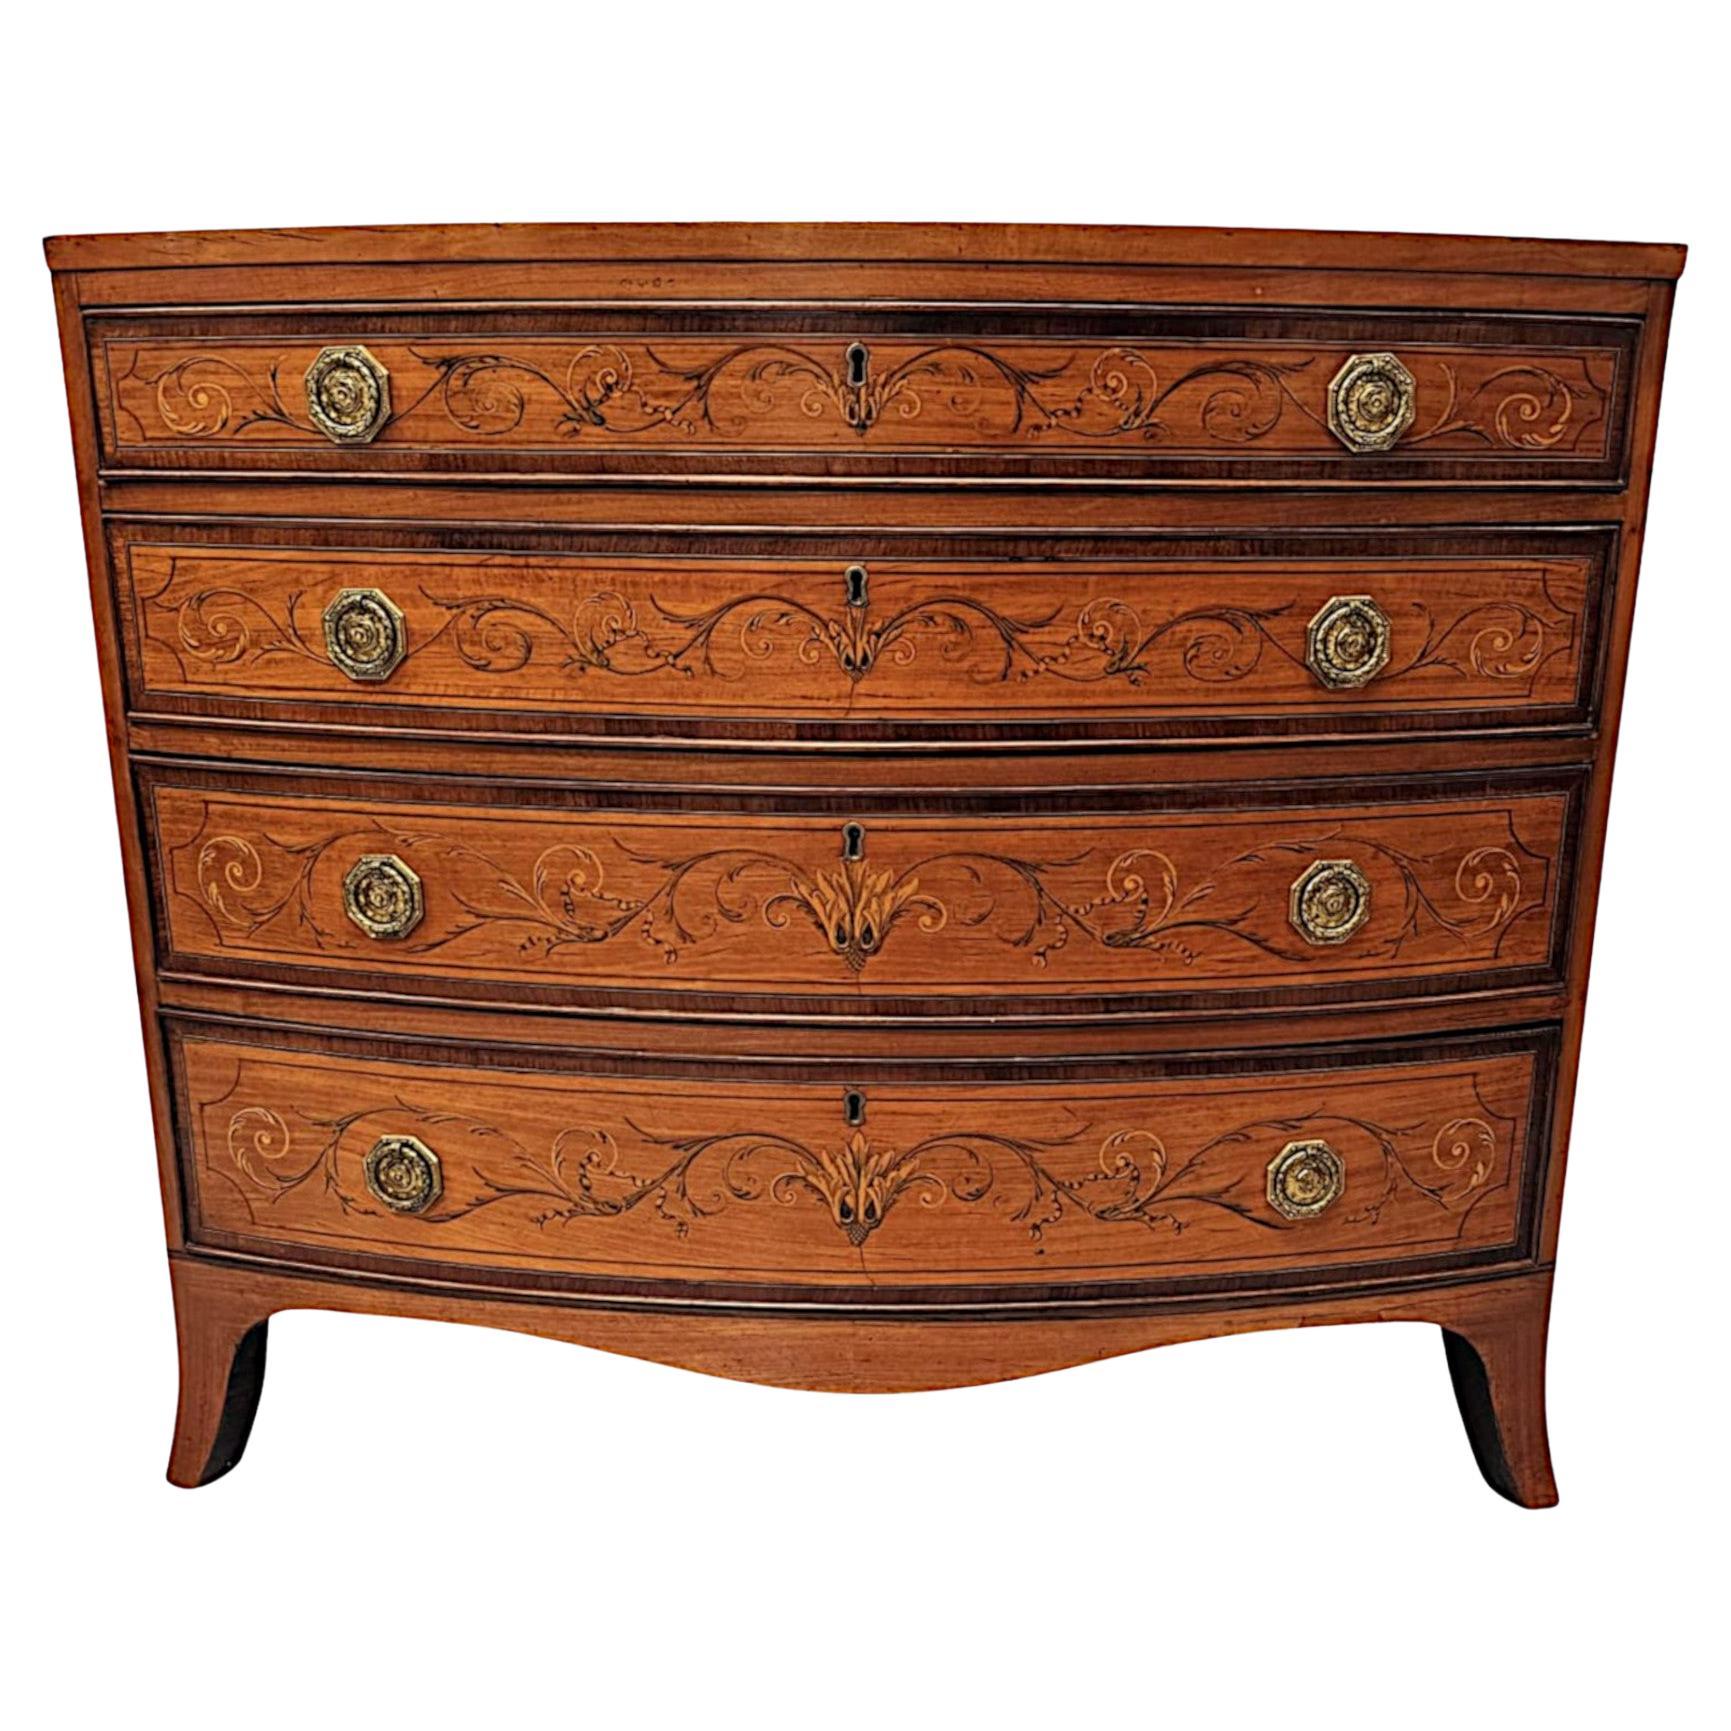  A Very Rare Early 19th Century Regency Bowfronted Chest of Drawers For Sale